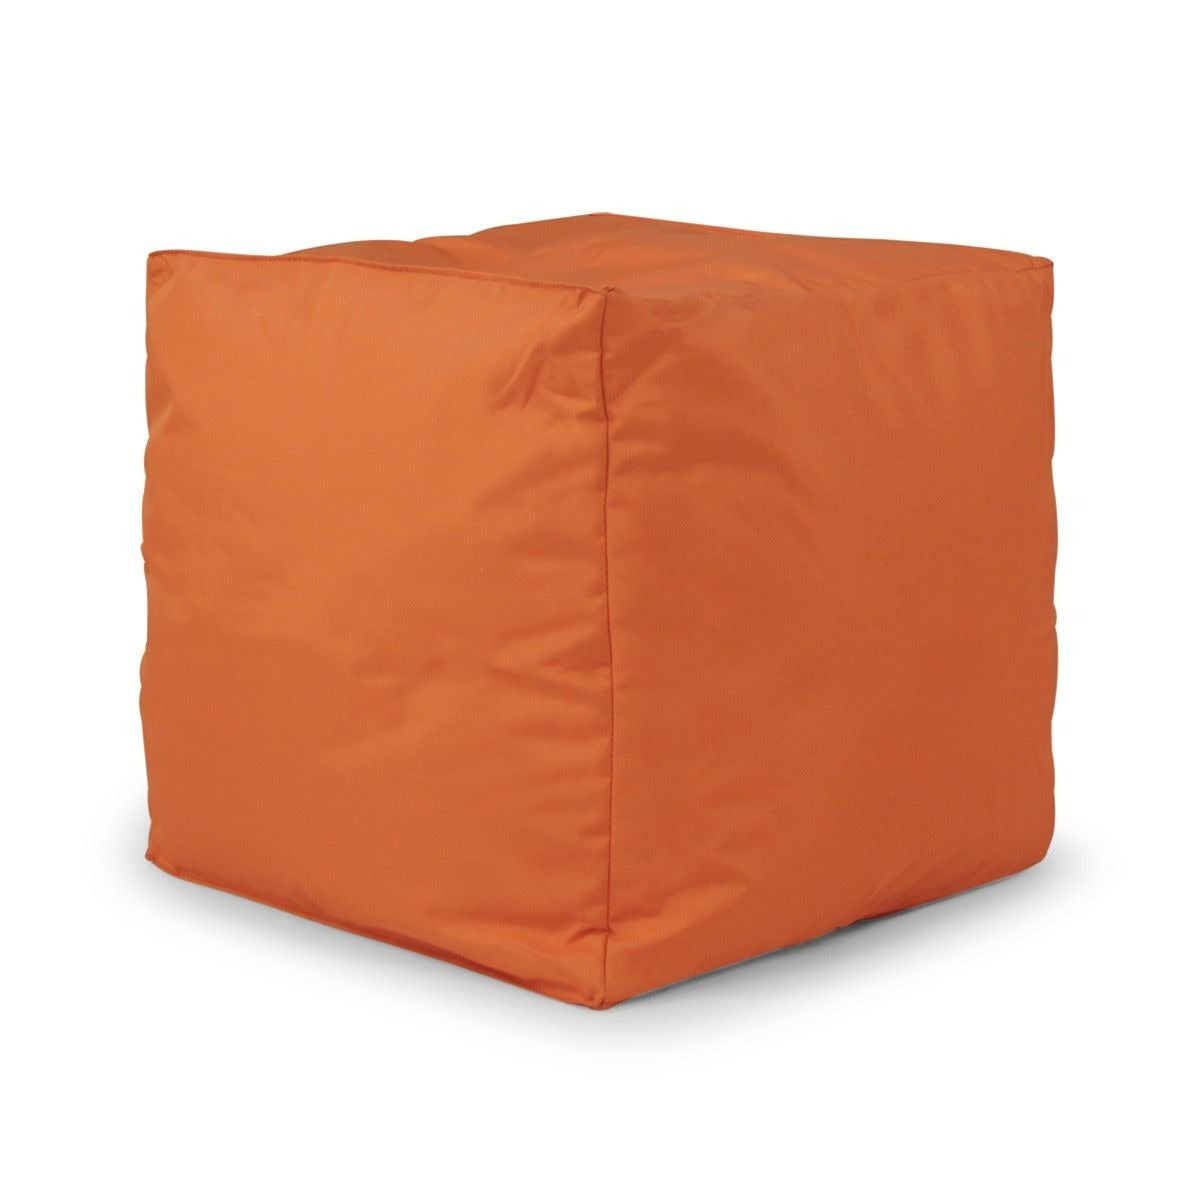 Primary Cube Bean Bag, Sturdy, stackable and indispensable! These Classroom Cube Bean Bags are a colourful accessory for extra seating, group work, break out areas, common rooms, libraries, or even as classroom display props - the list is endless! Lightweight and easily manoeuvrable for primary or secondary school students. Water Resistant Perfect for quiet areas and reading corners, our bean bags are great for creating a comfortable and fun environment. The Primary cube bean bag measures 45cm x 45cm x 45cm